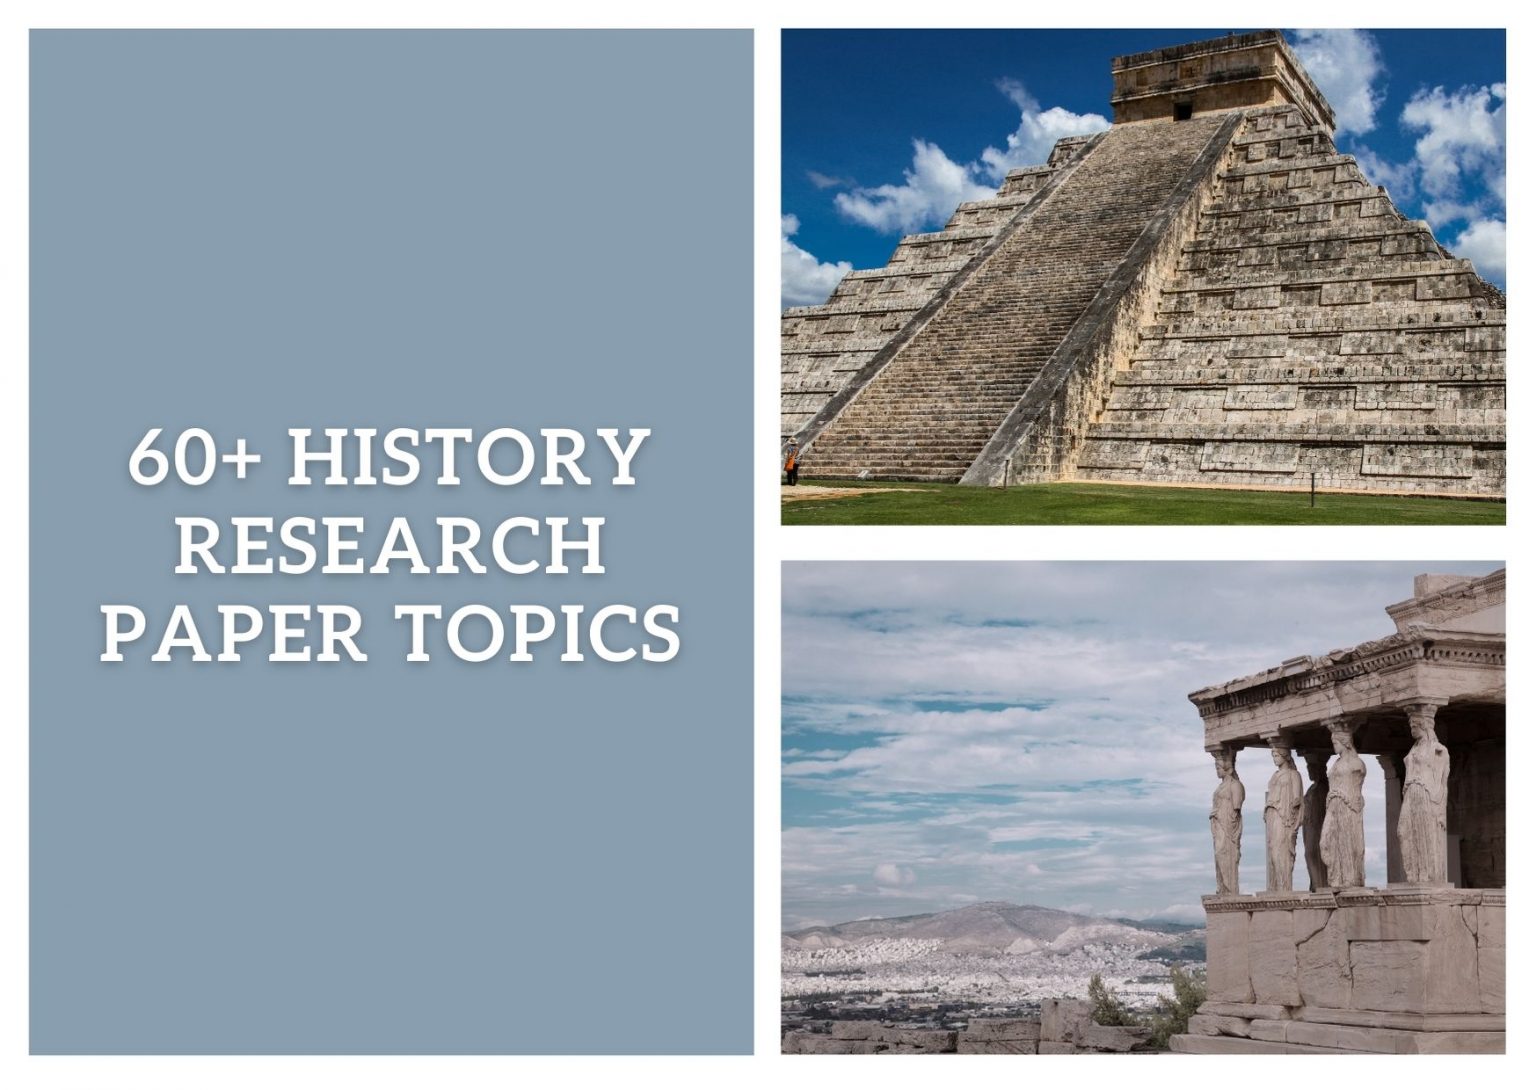 early american history research paper topics